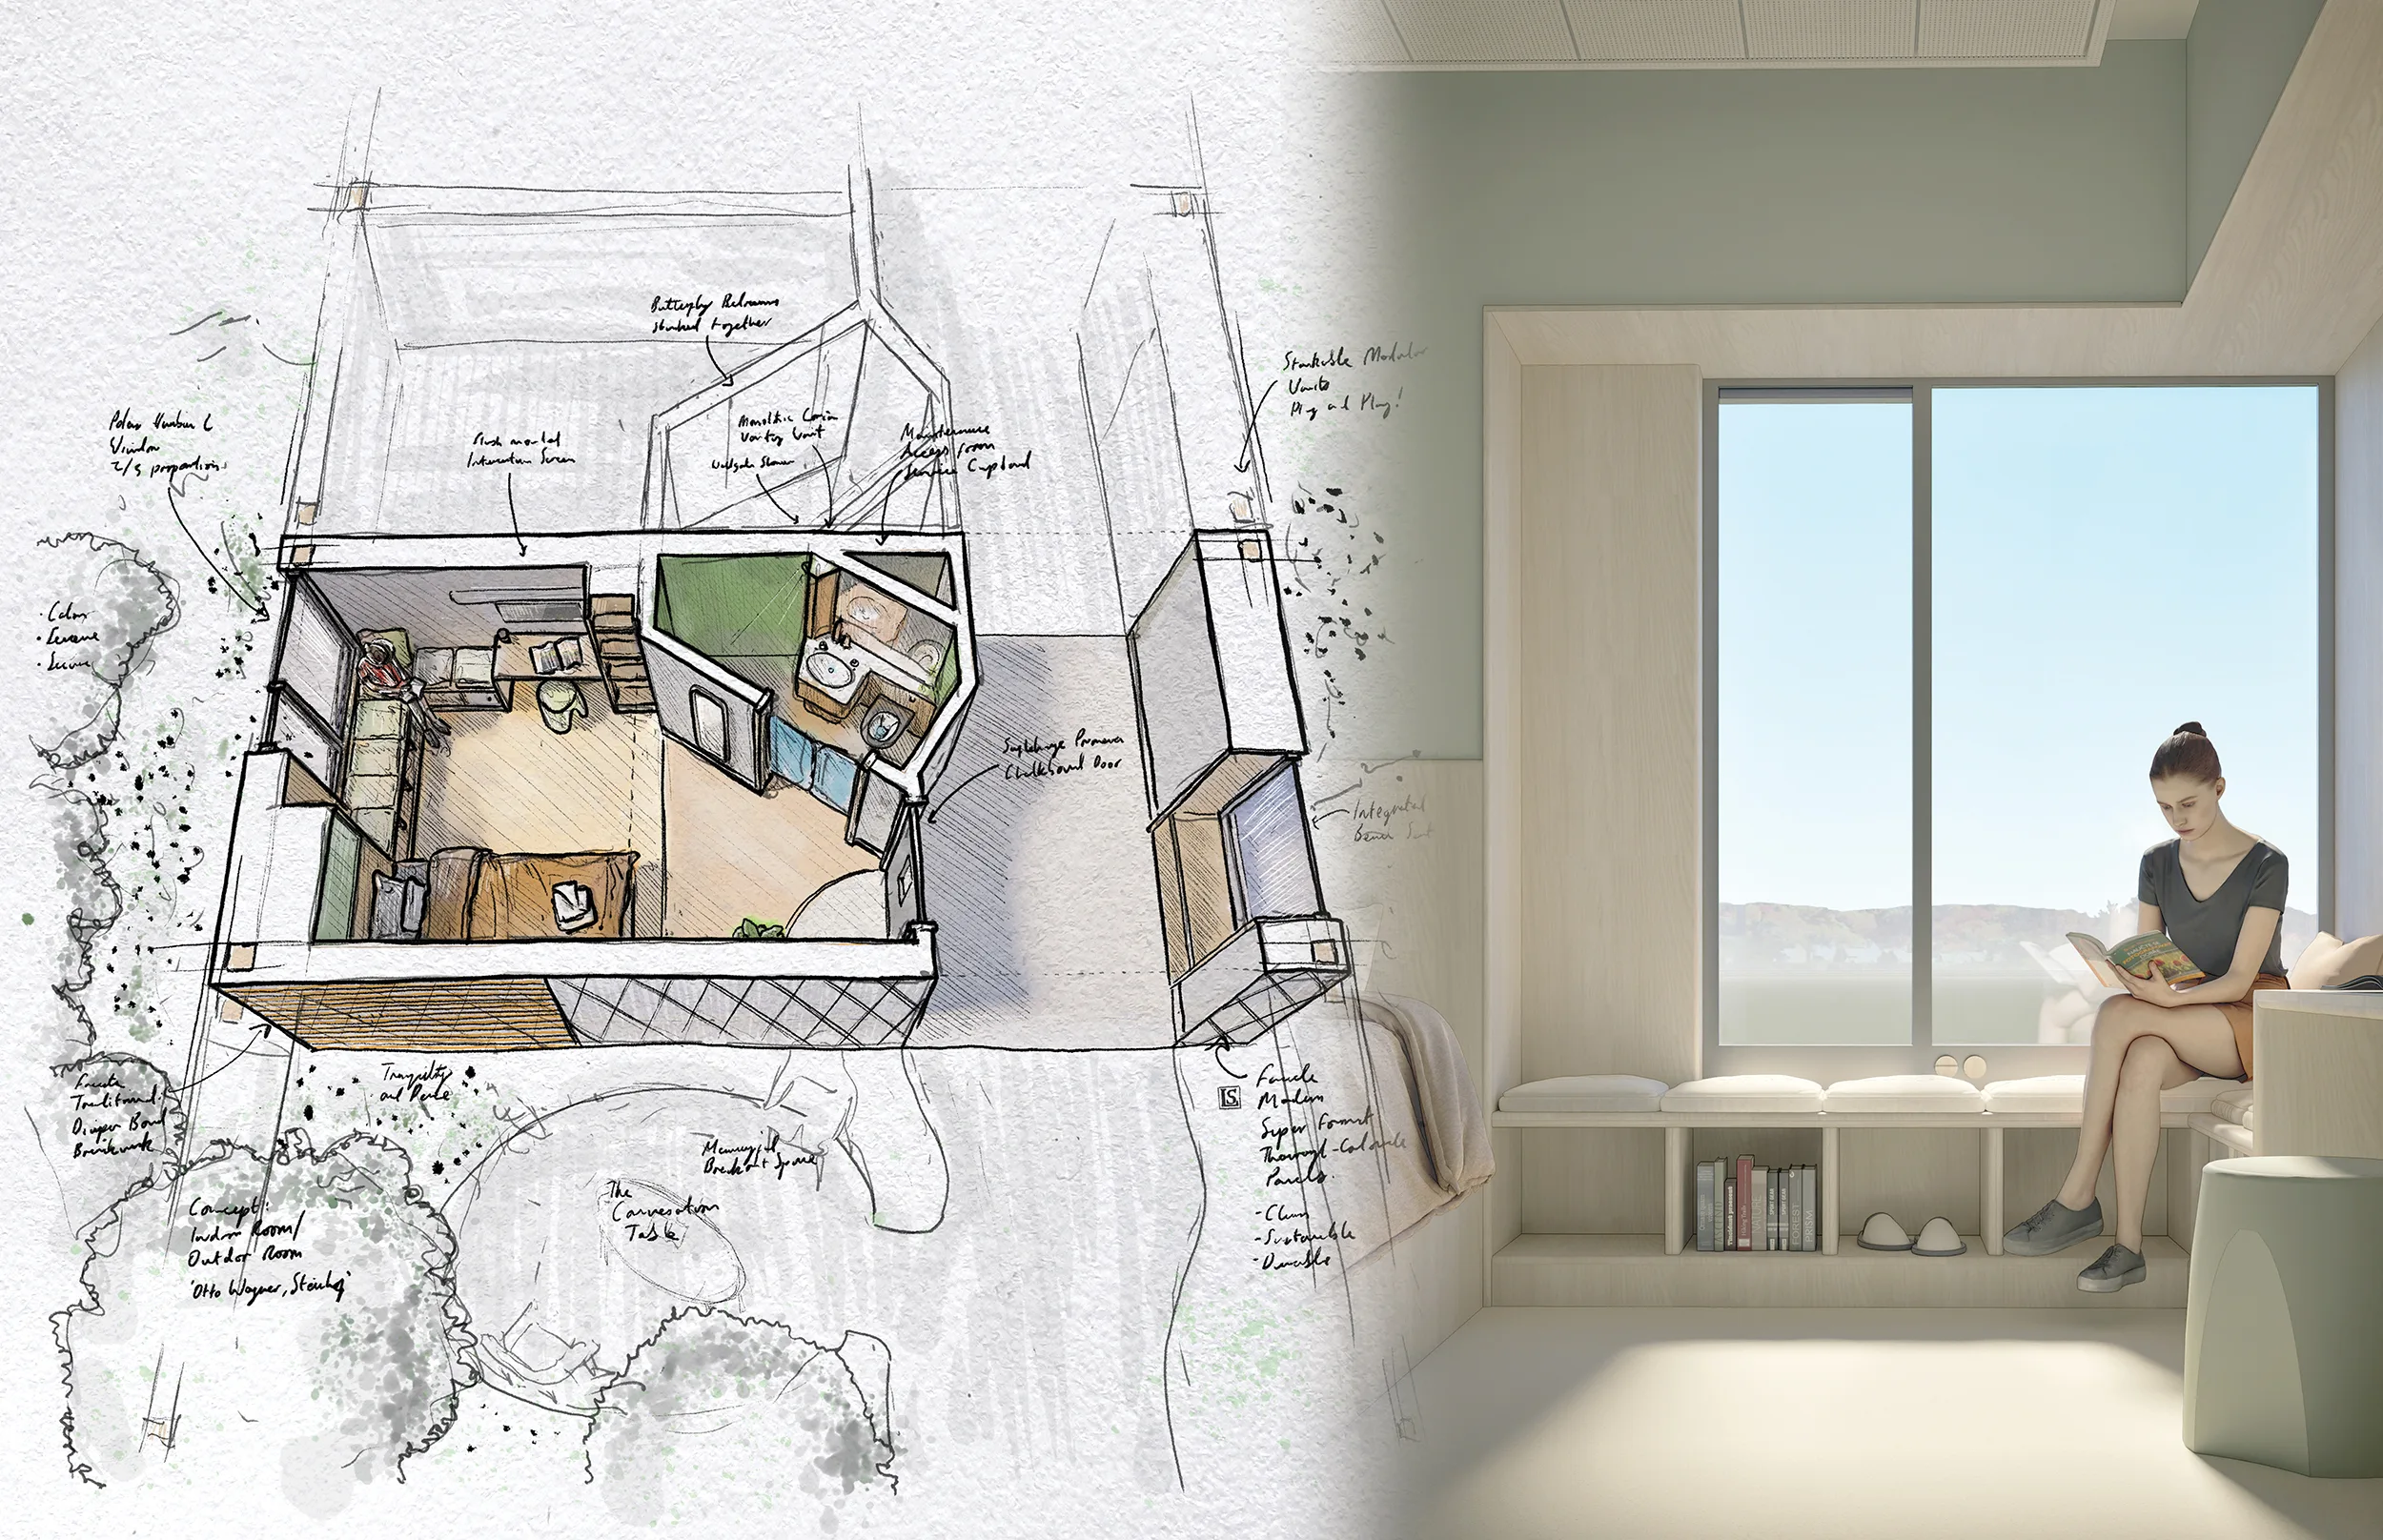 Sketch and computer render of a design for a modern mental health treatment bedroom. A woman sits in a window seat at the far end.